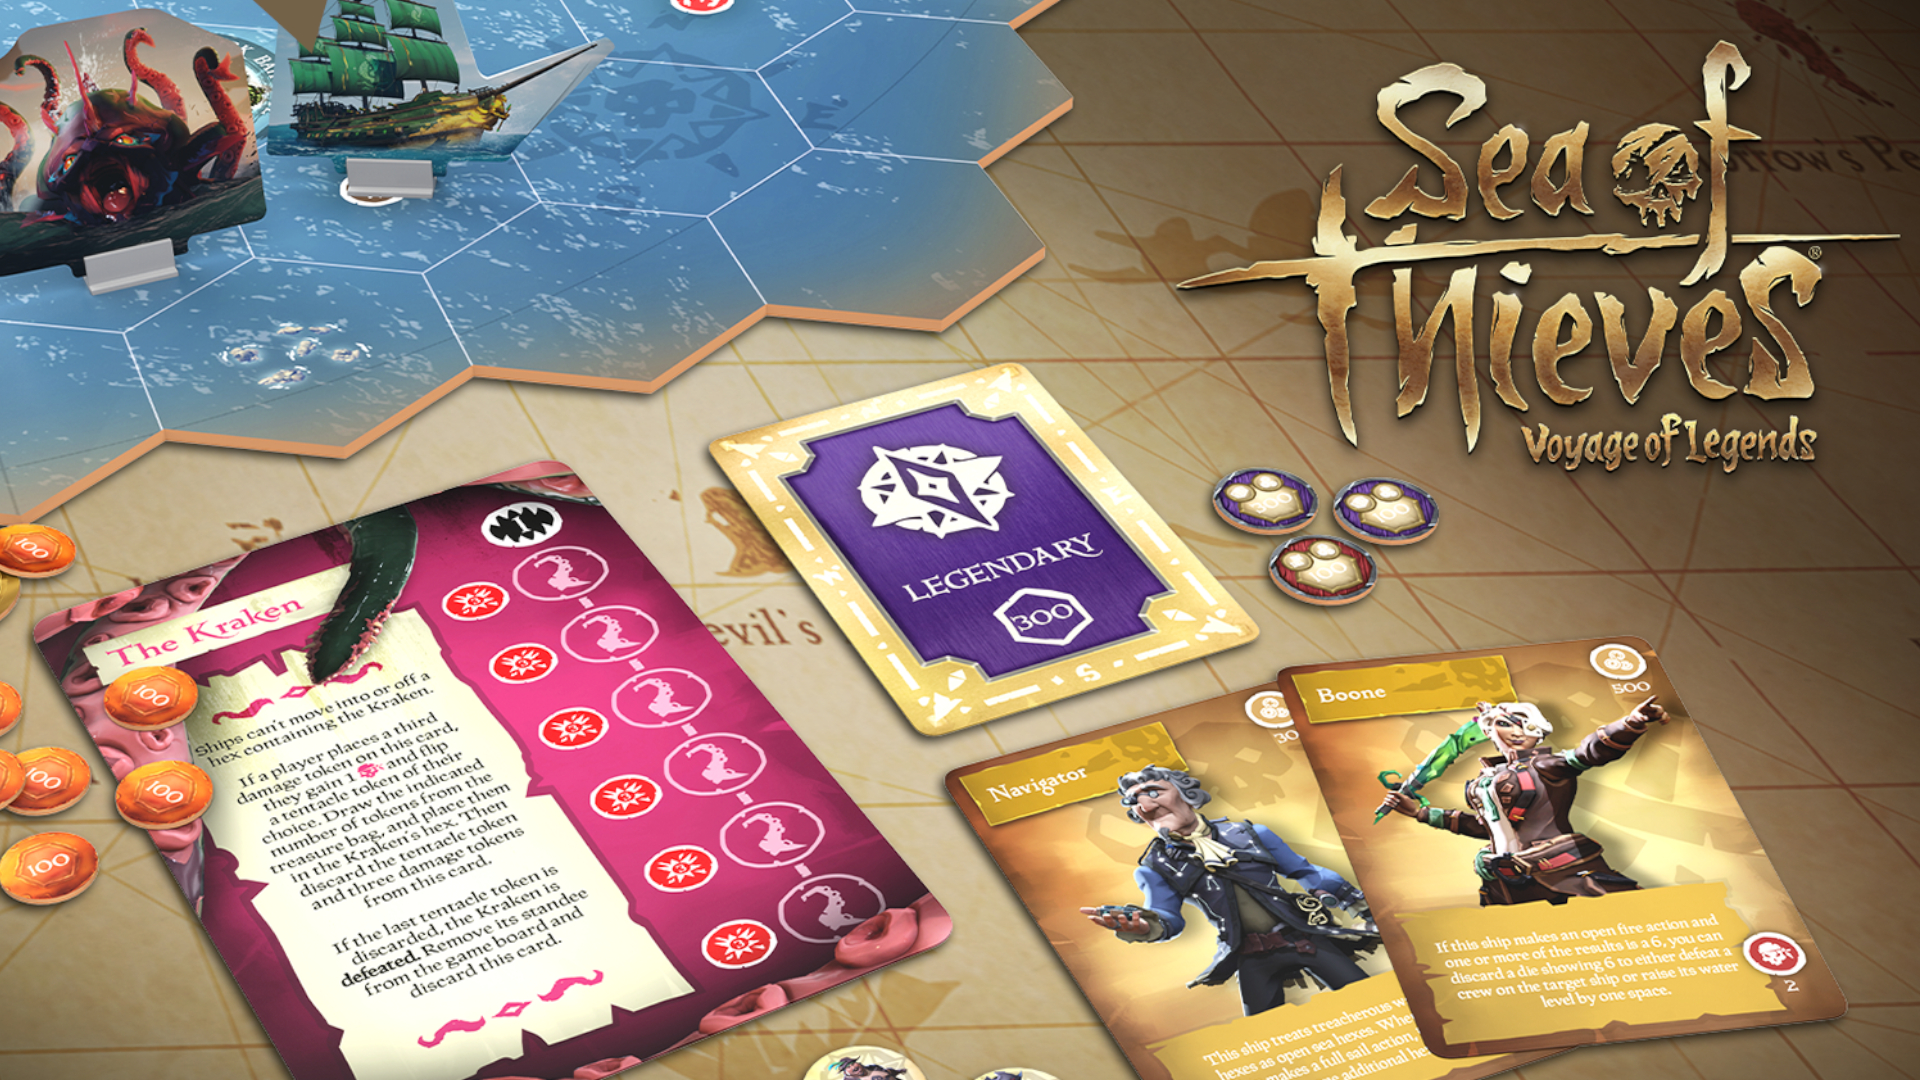 Sea of Thieves board game gets a release date, title, and first look